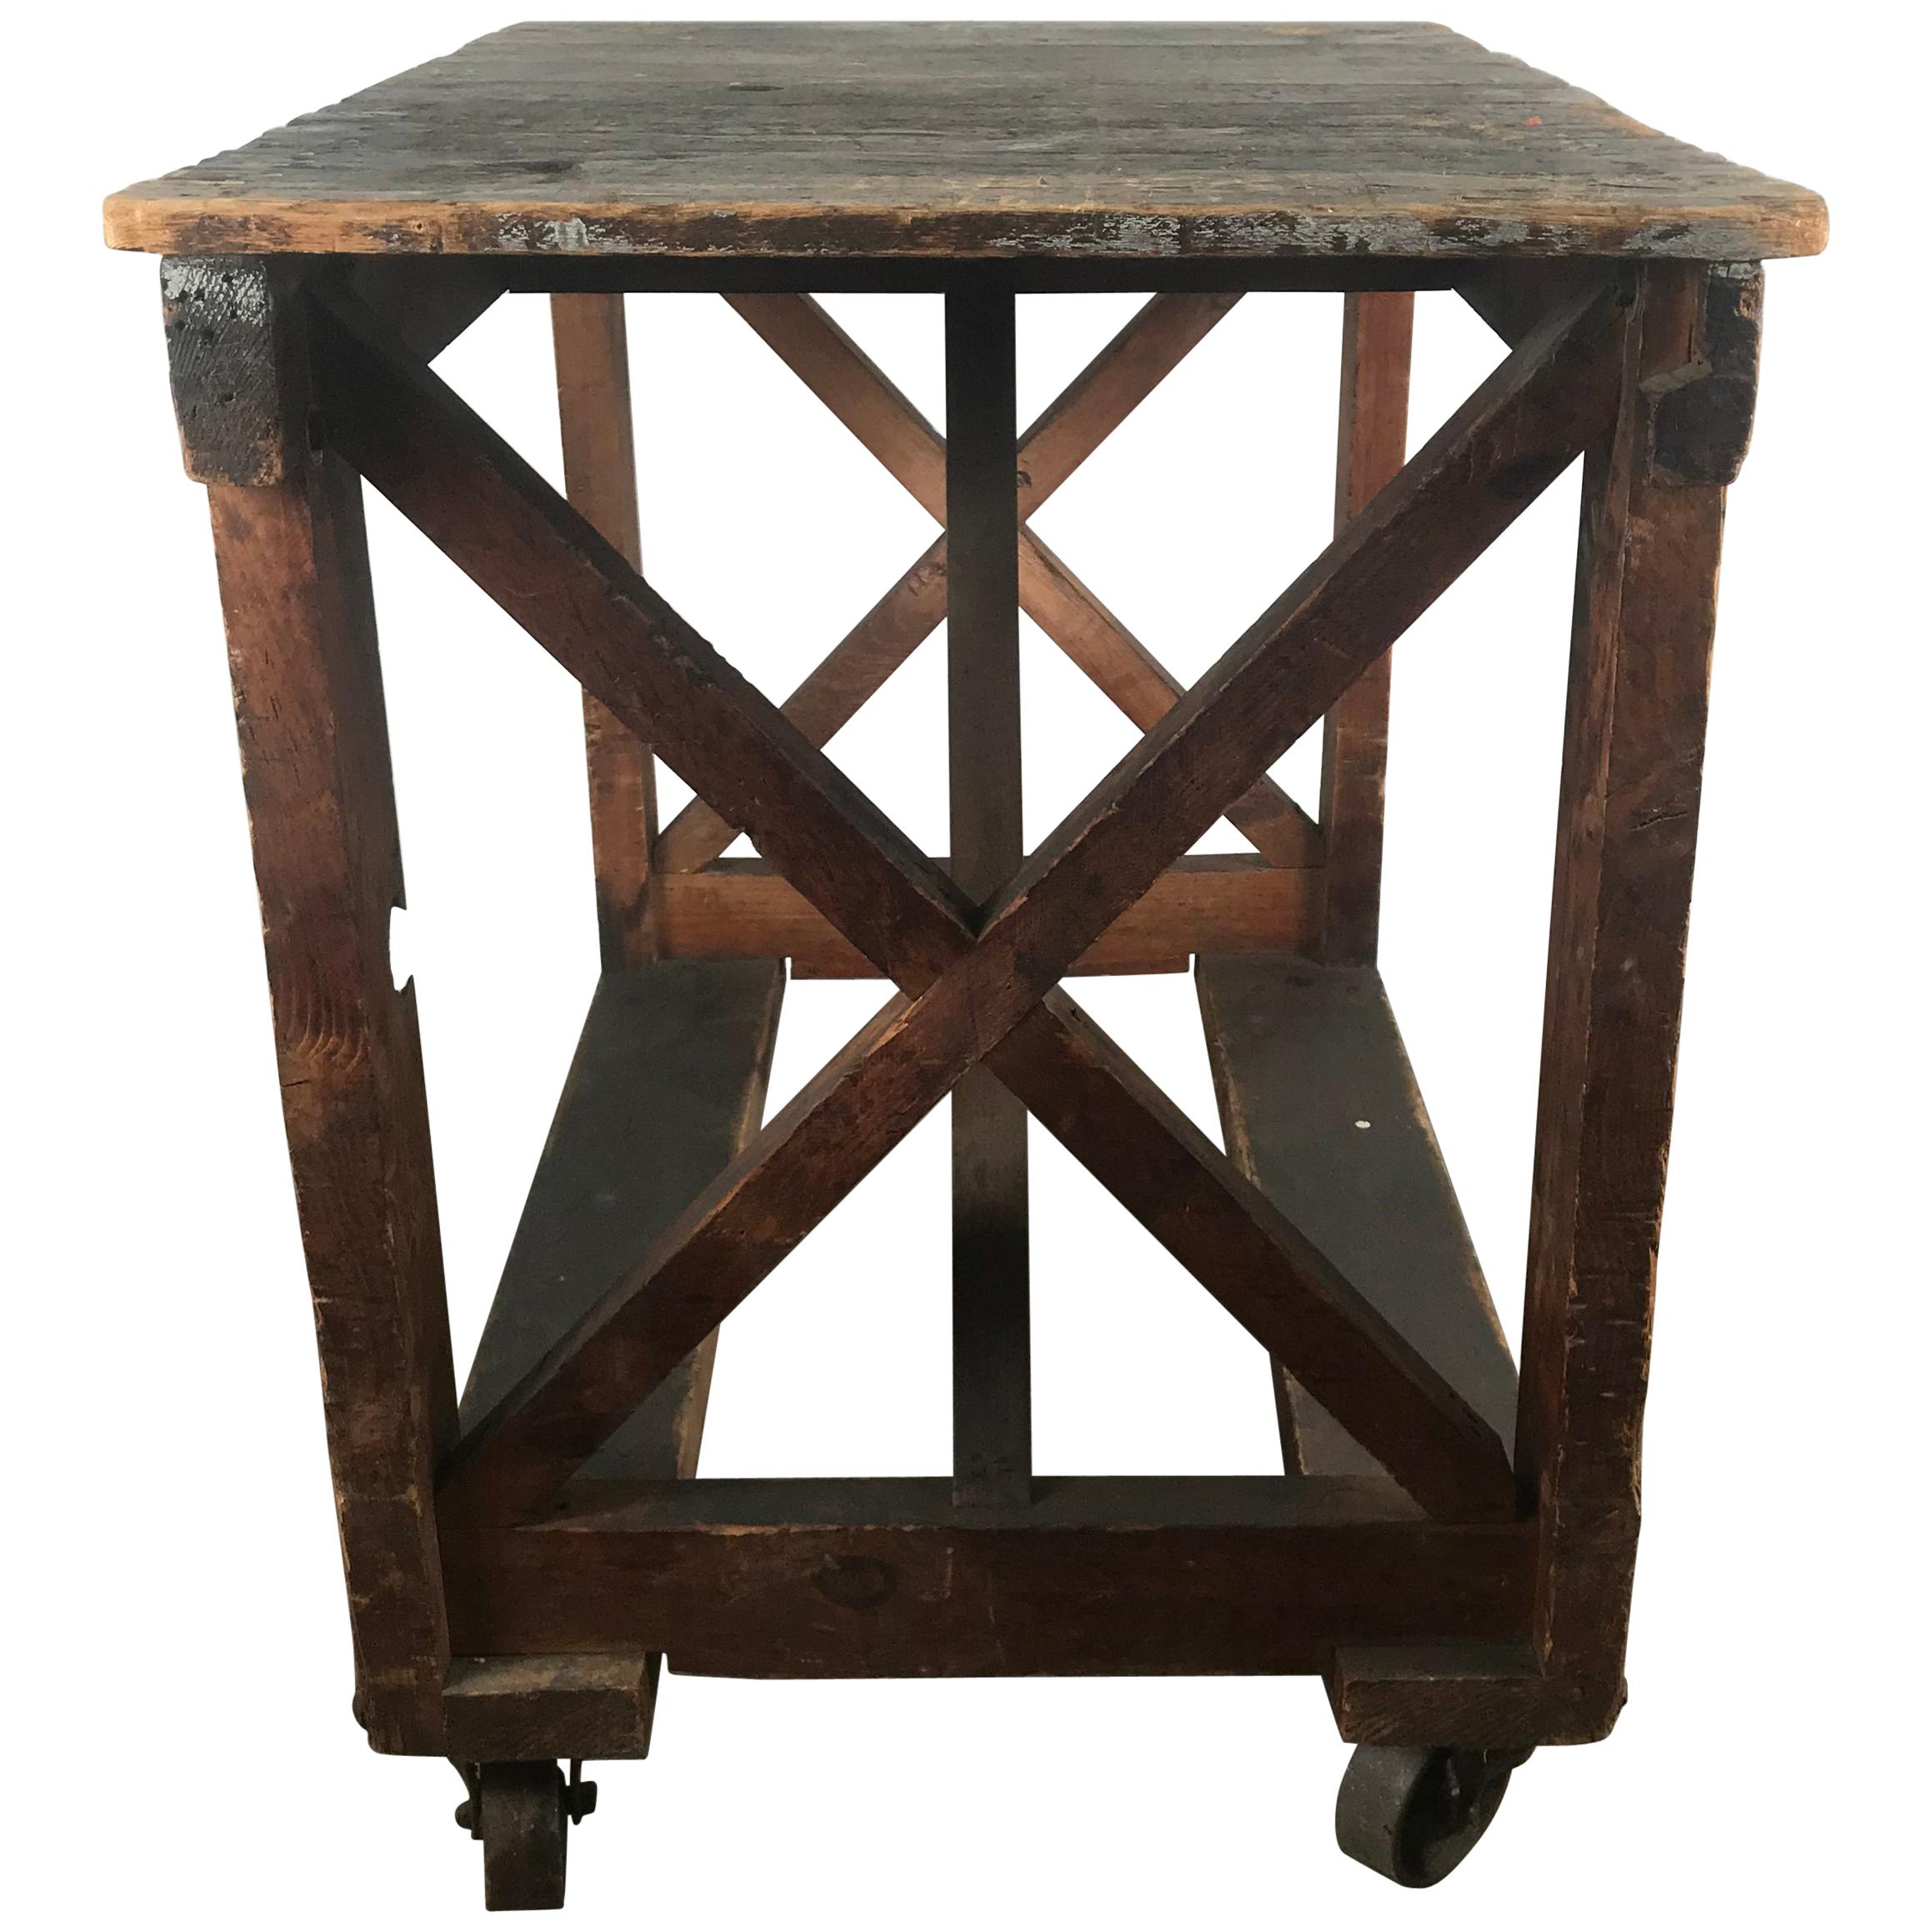 Antique Industrial Factory Work Table on Iron Castors